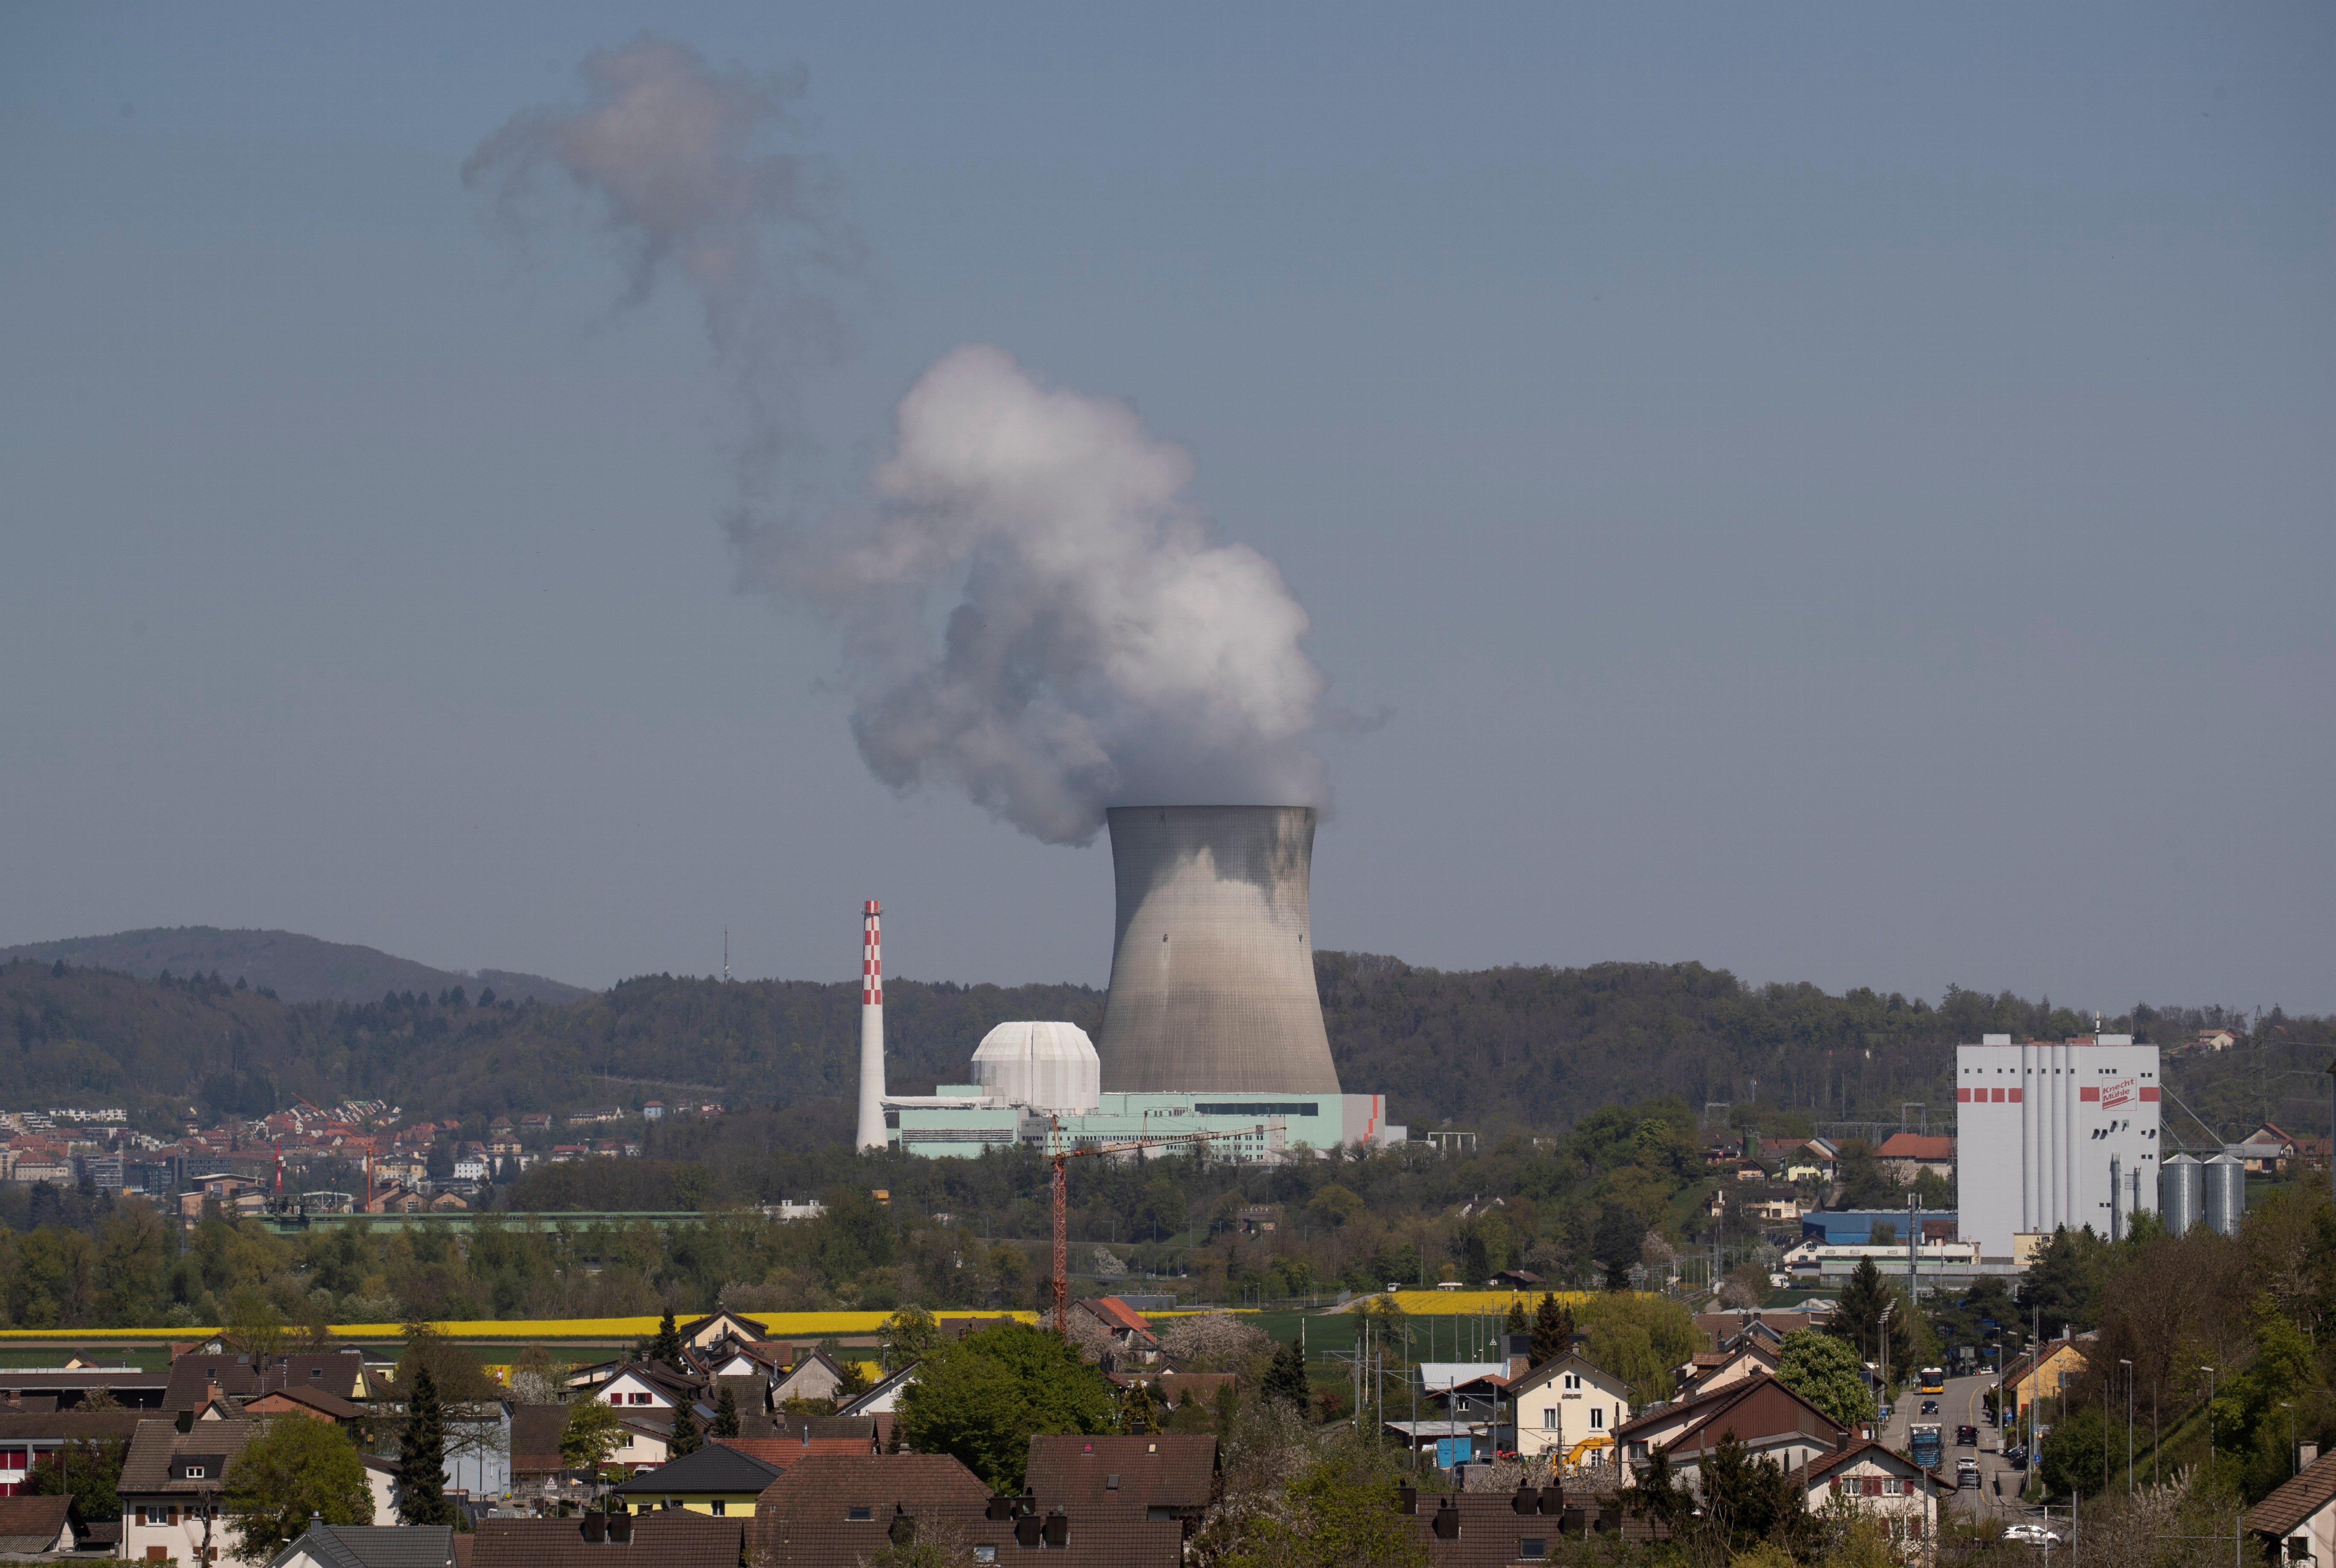 Nuclear power plant in Switzerland